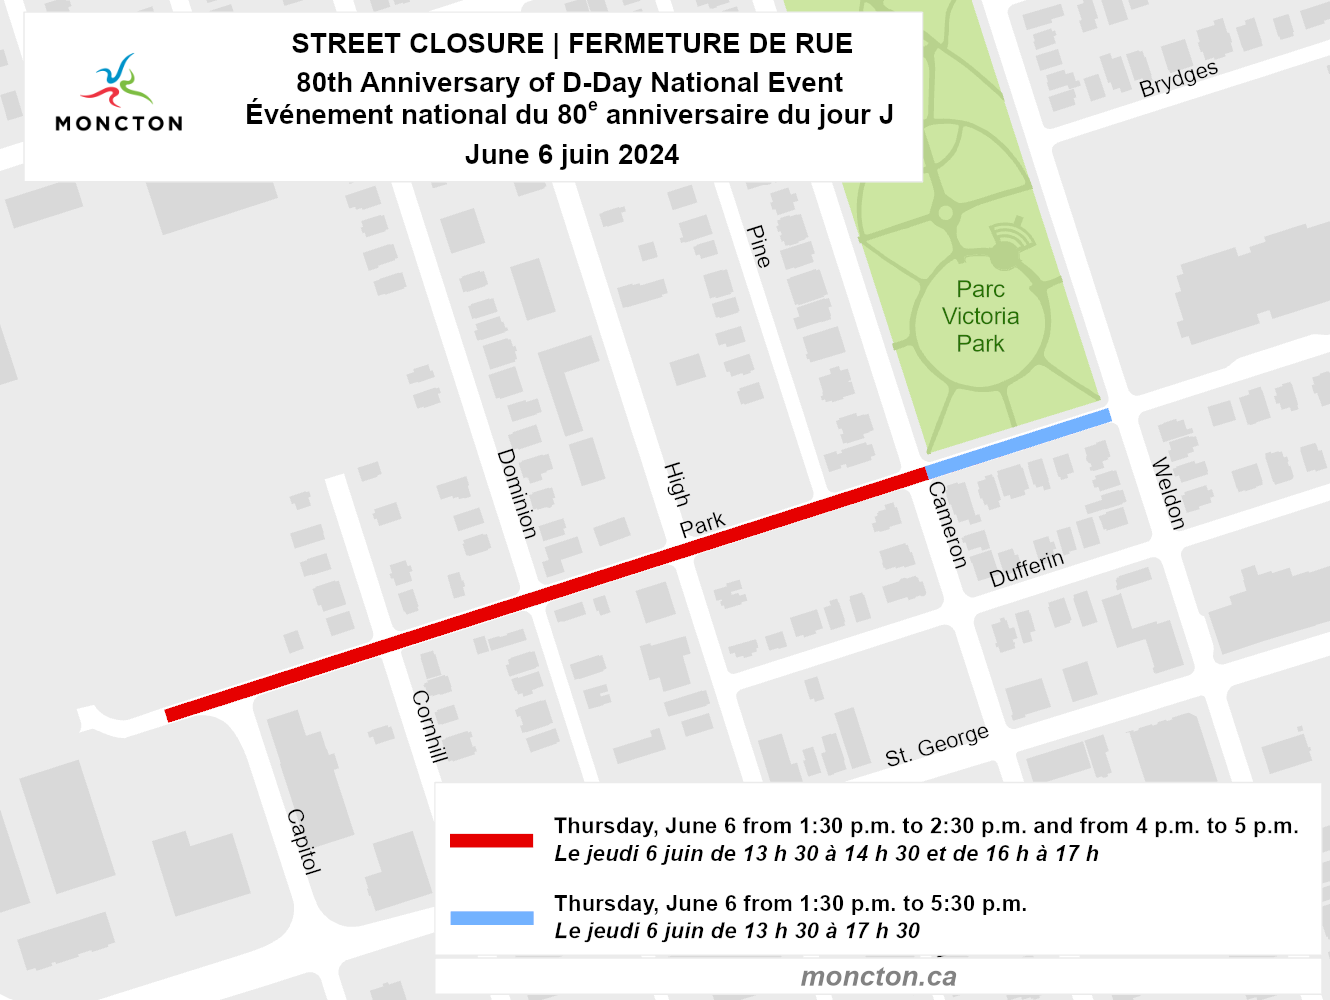 D-Day street closure map